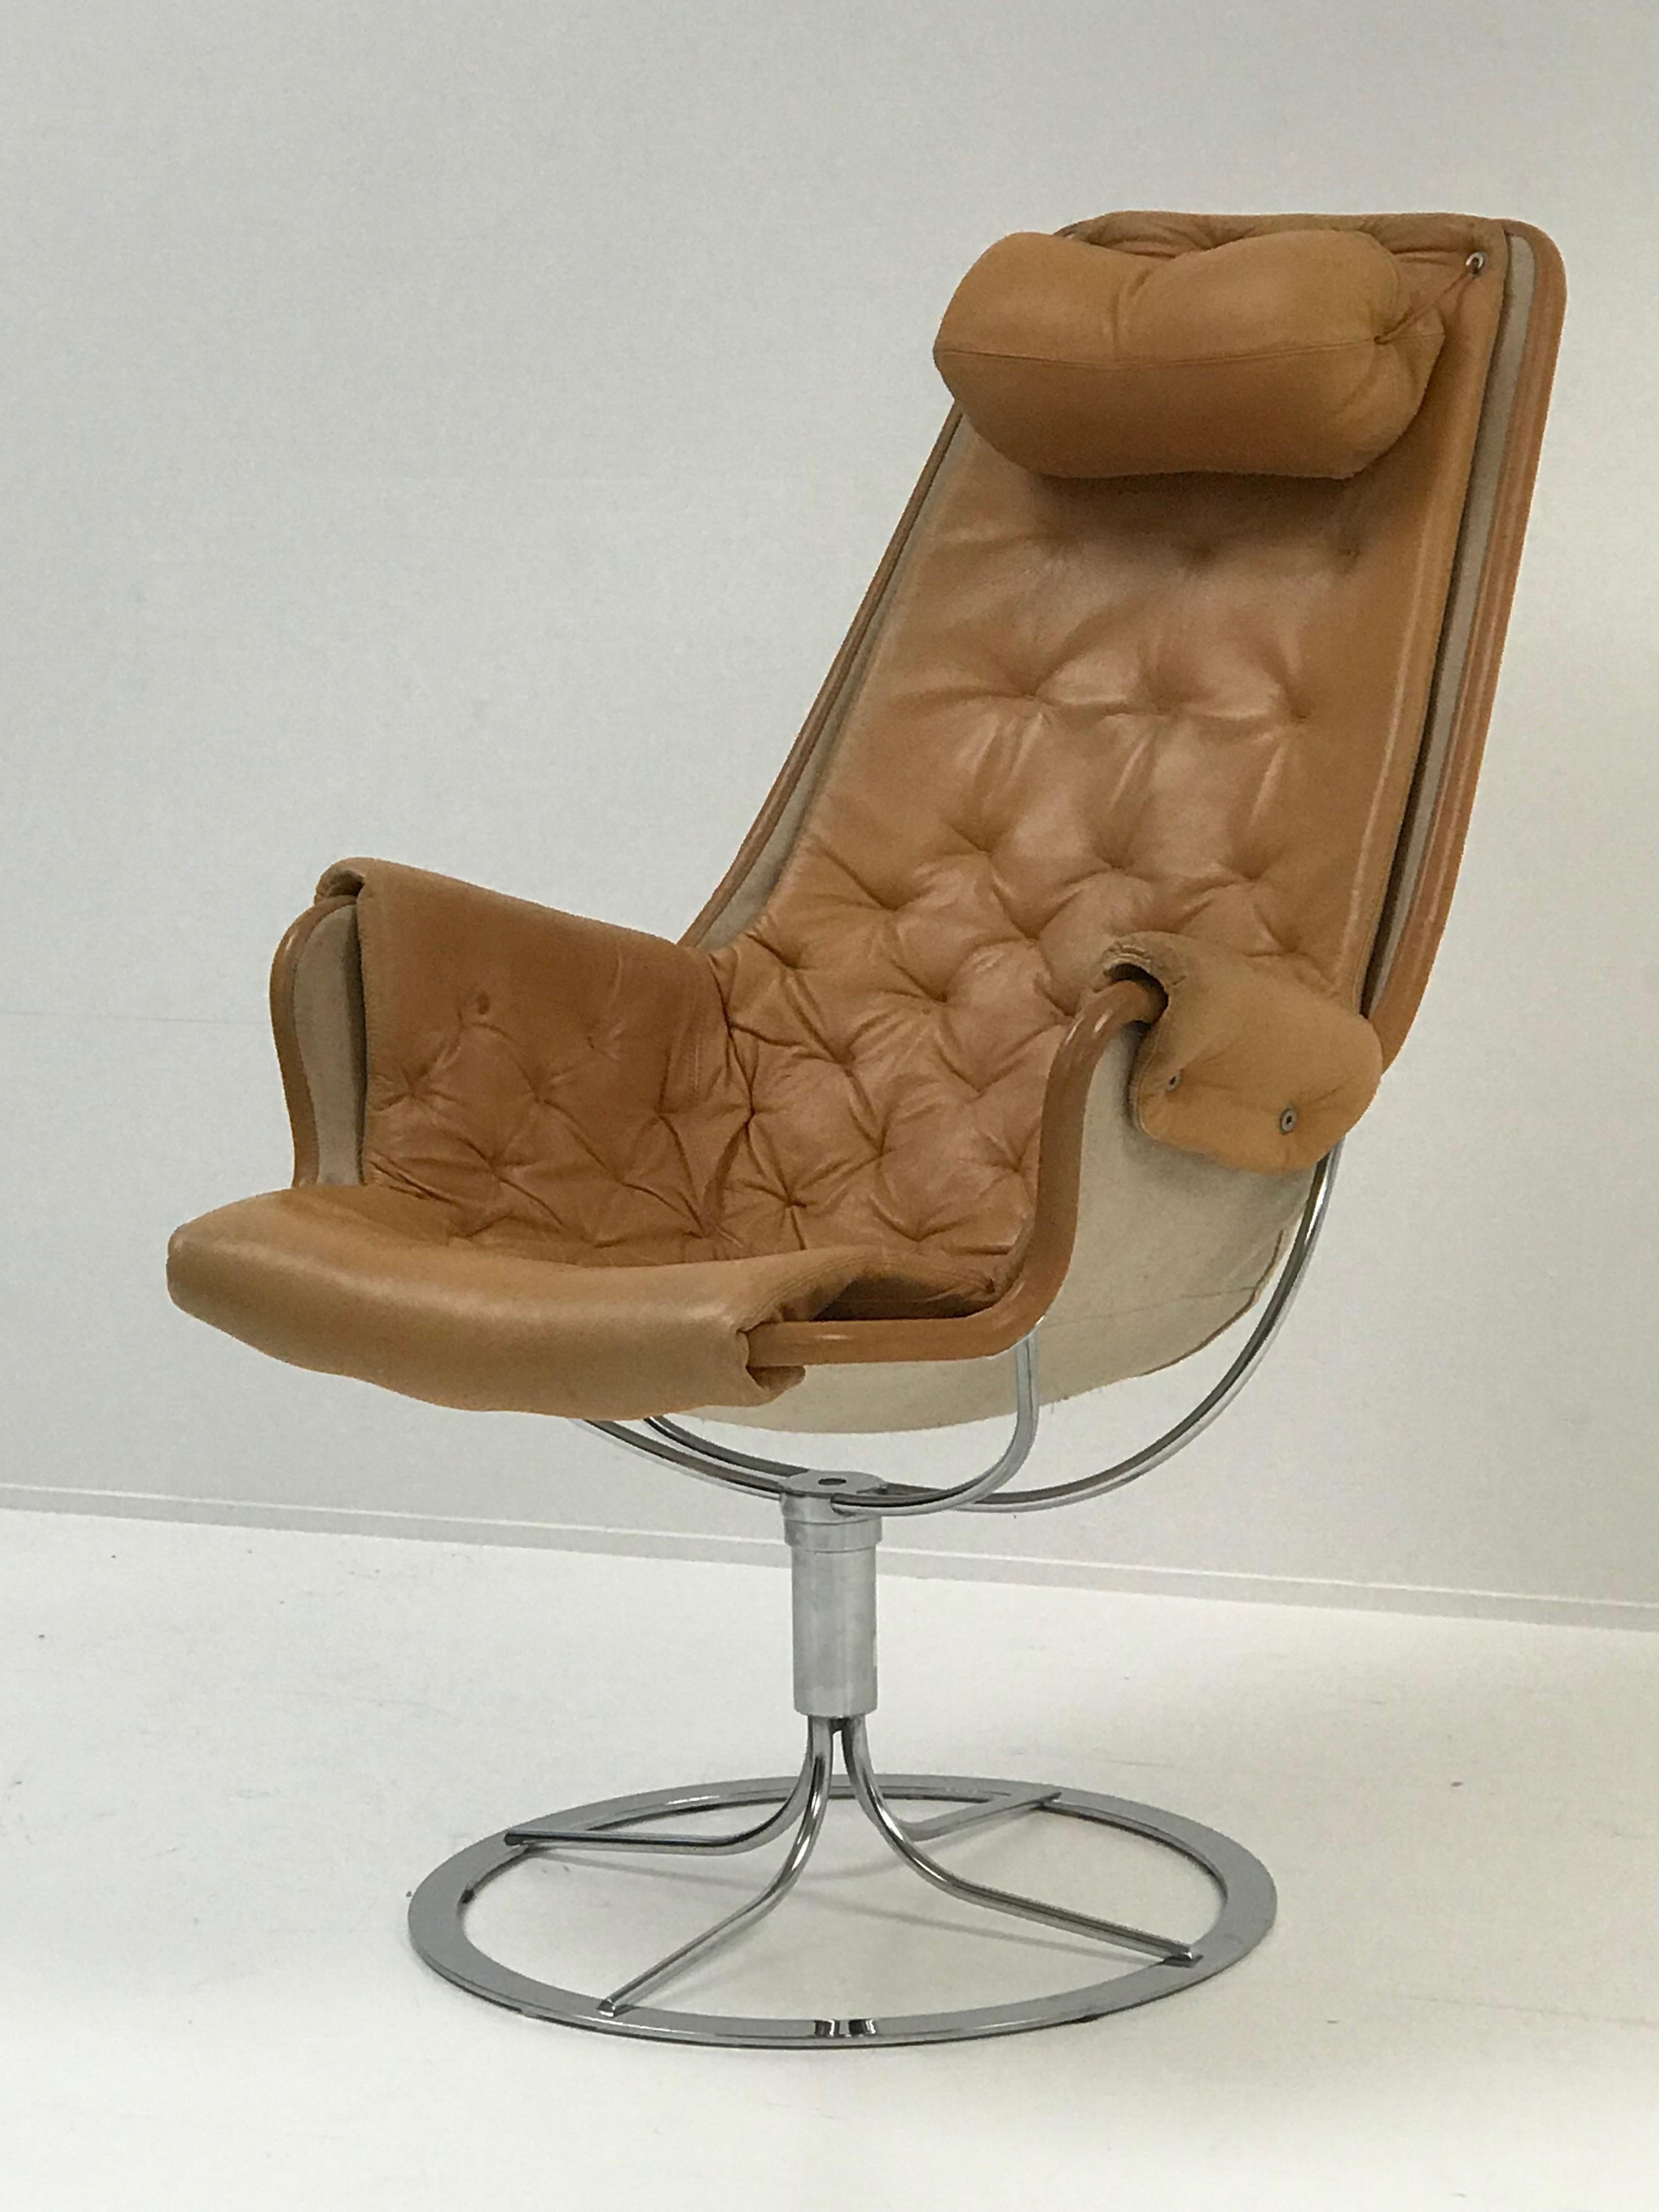 Patinated Jetson Chair by Bruno Matthson, 1969